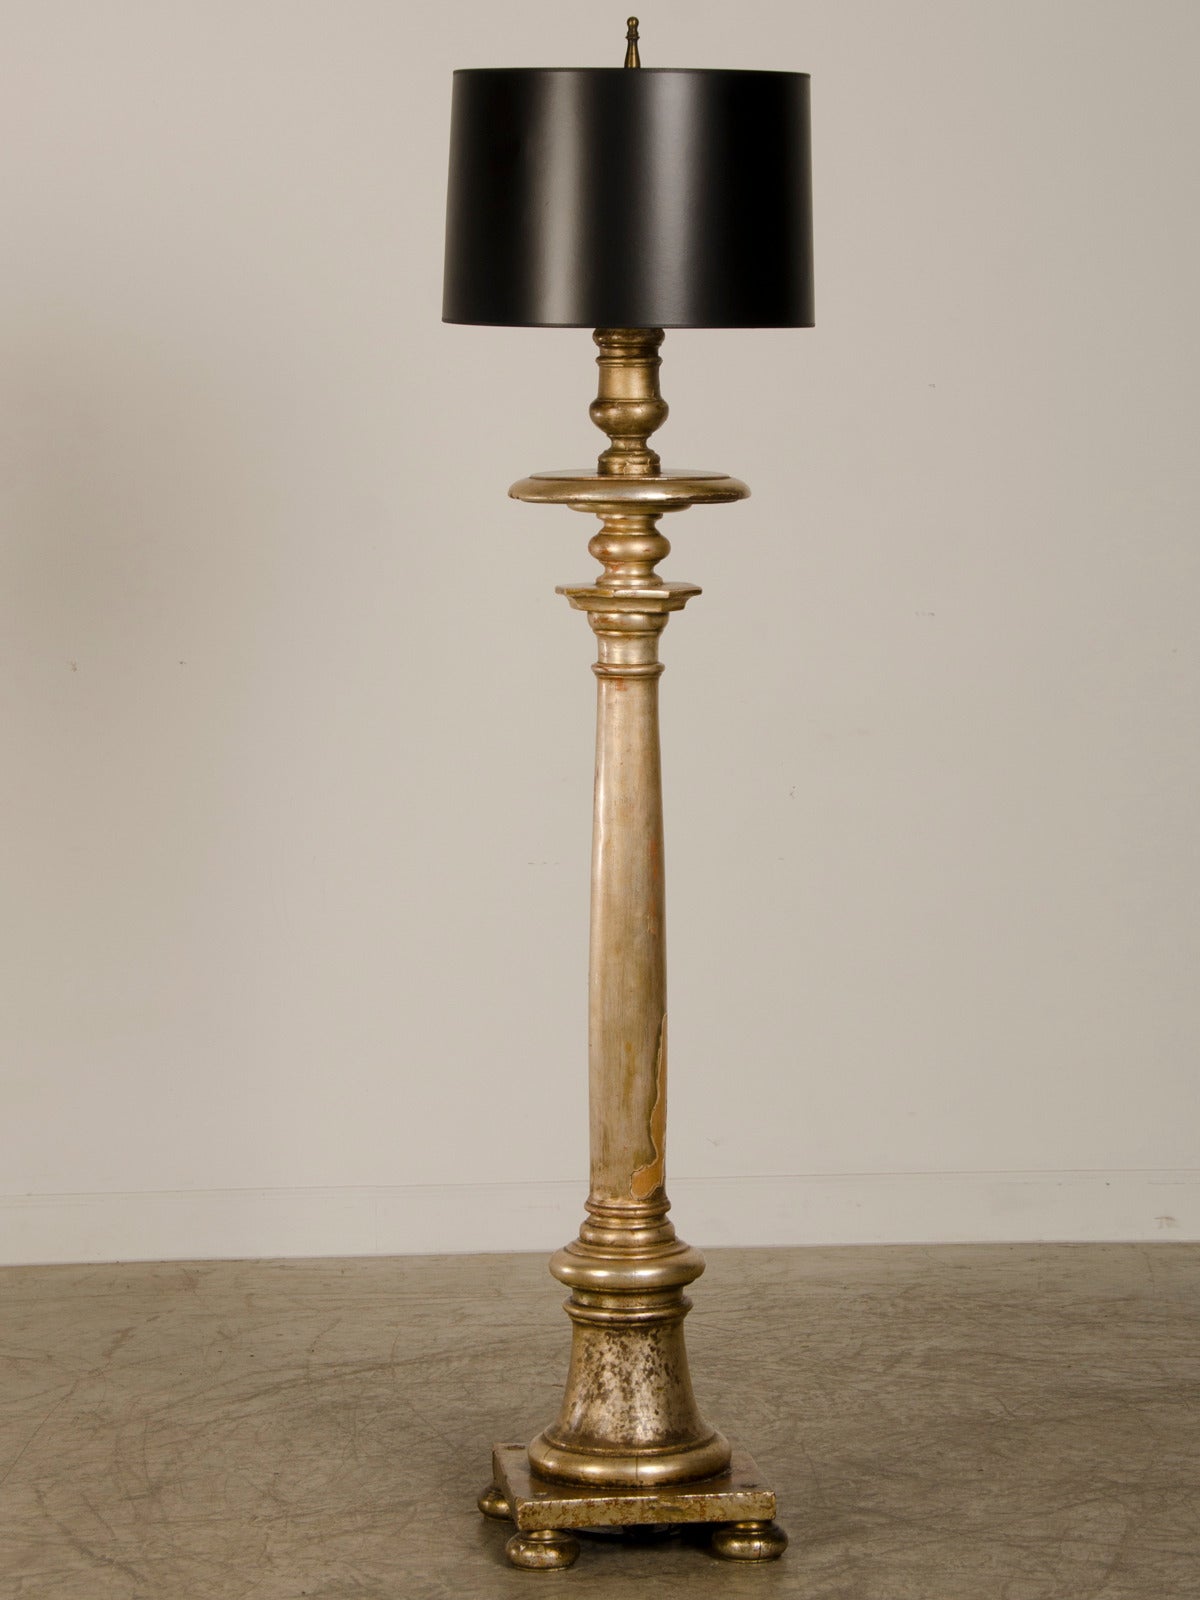 Receive our new selections direct from 1stdibs by email each week. Please click Follow Dealer below and see them first!

An imposing antique Italian silver gilt candle stand circa 1890 now converted to a floor lamp. Please look at the scale of